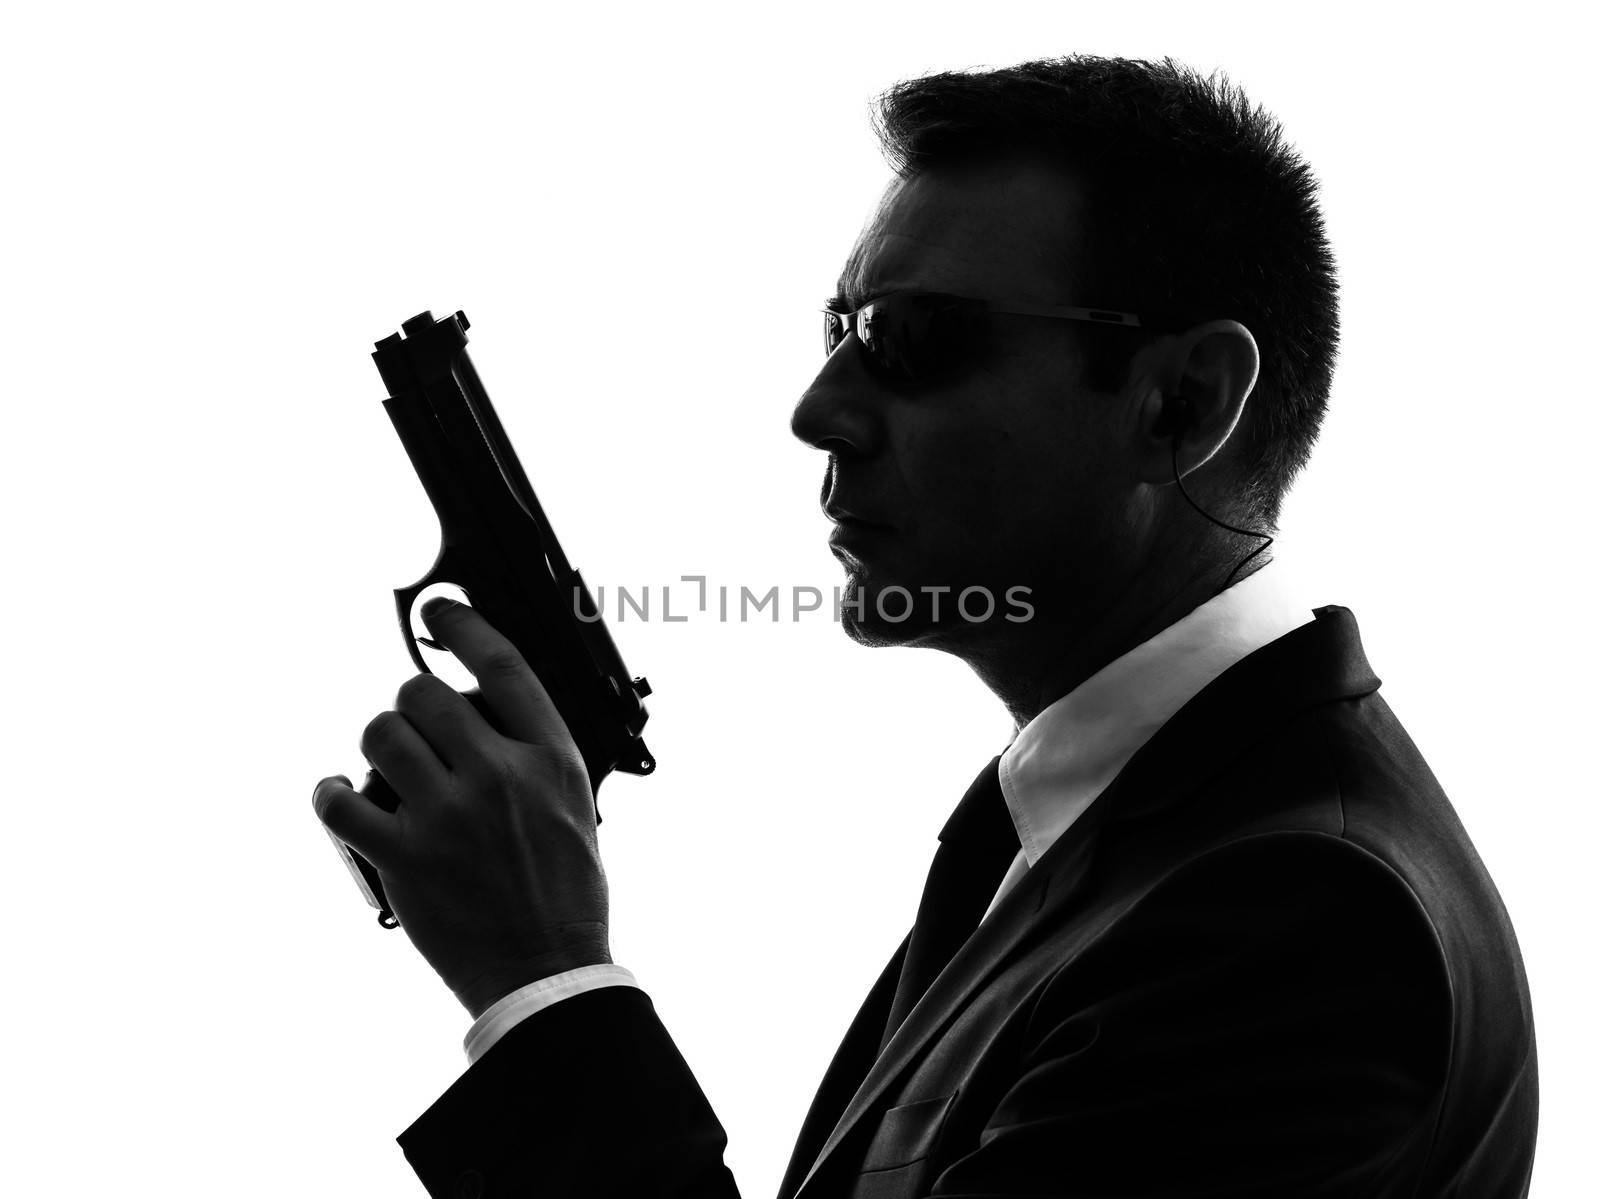 one secret service security bodyguard agent  man in silhouette  on white background